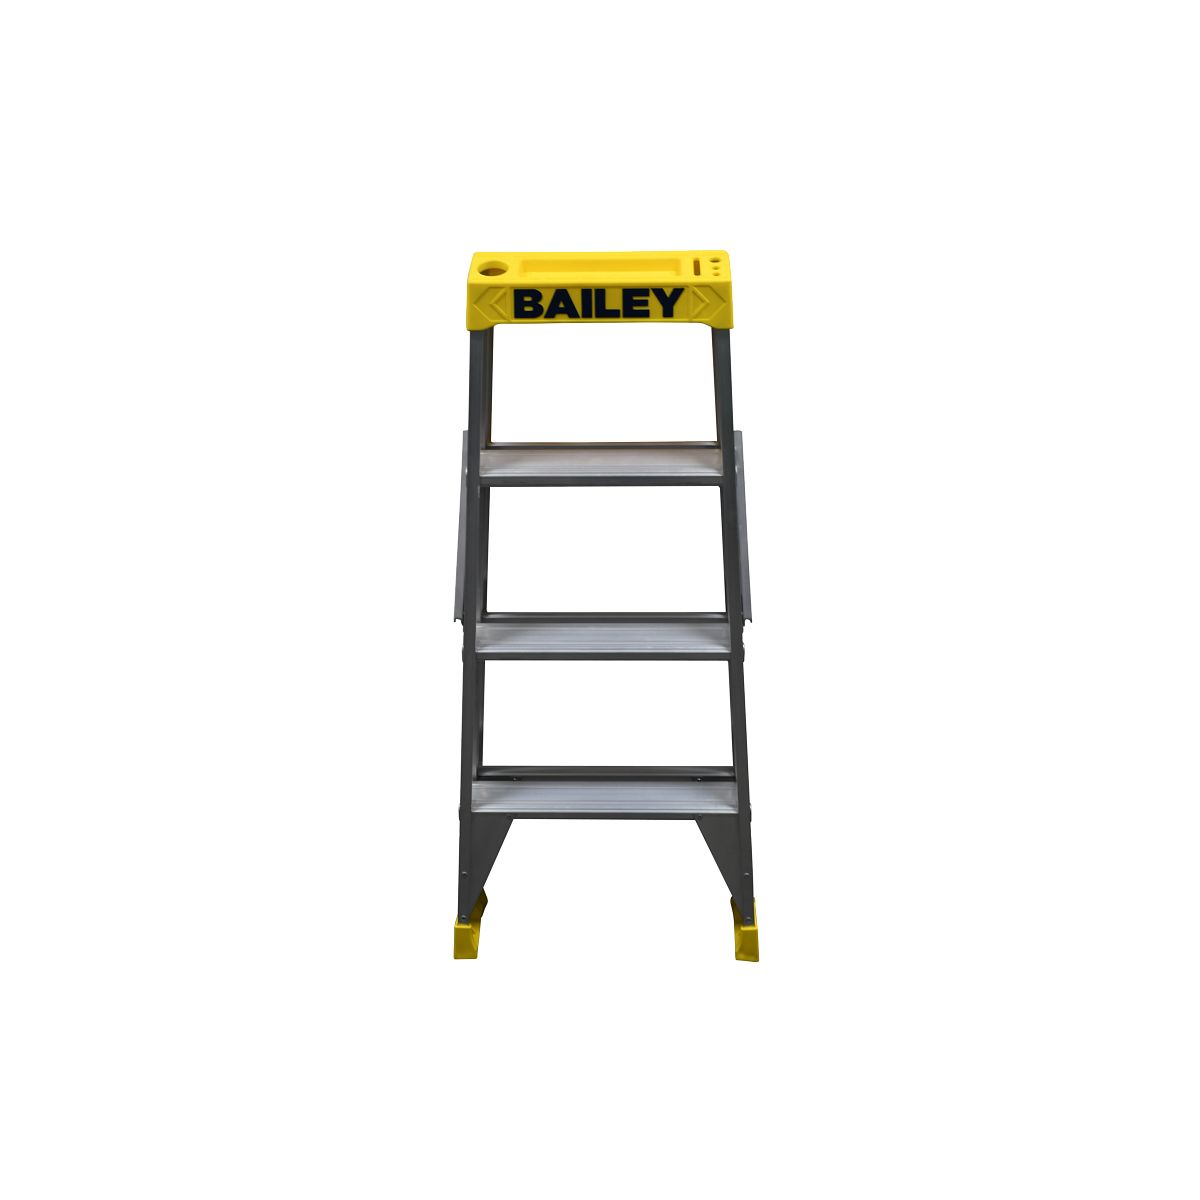 Pro Aluminium Double Sided Big Top Ladder 4 FS13967 by Bailey